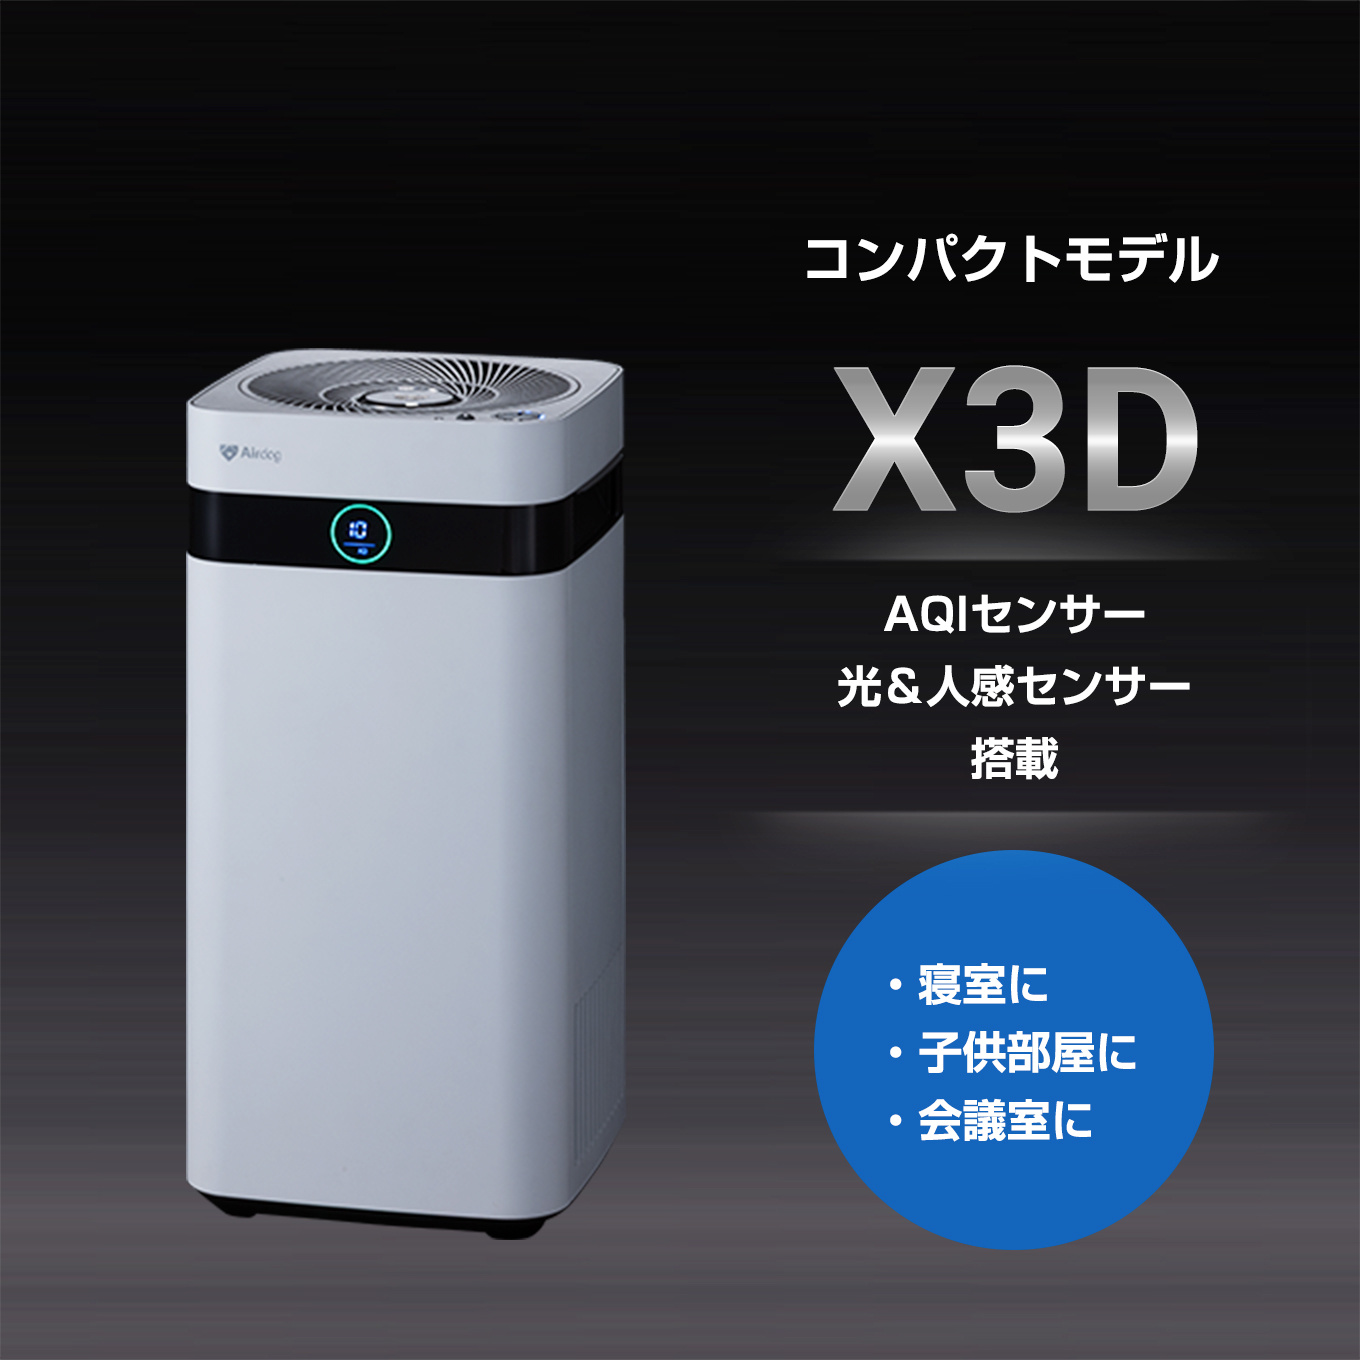 Airdog X3D【コンパクトモデル】：toConnect | トゥーコネクト